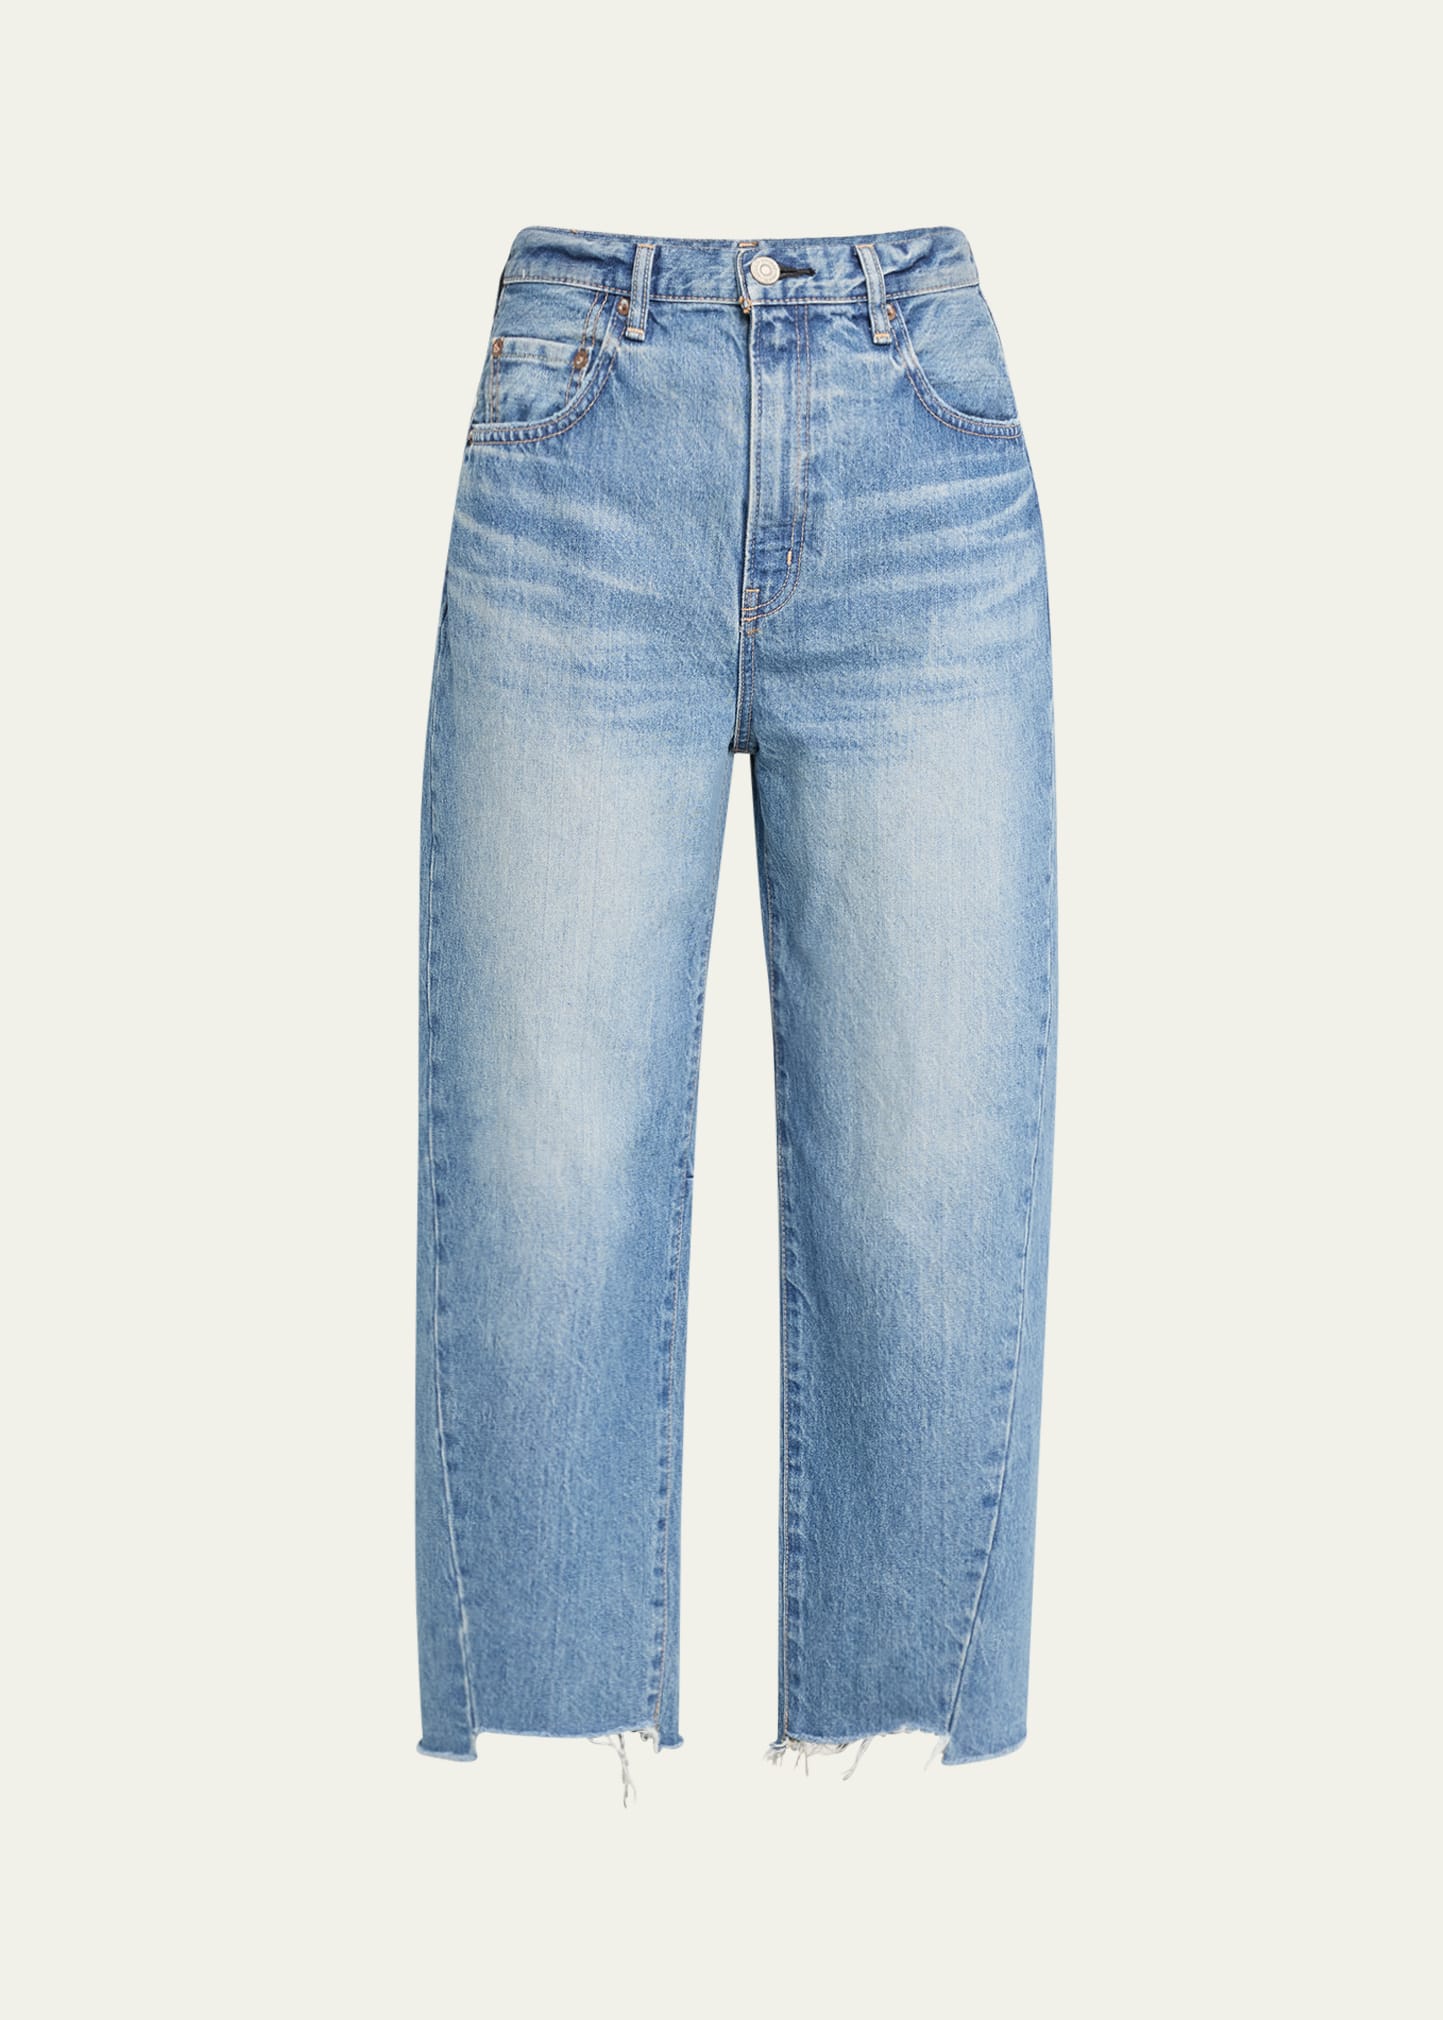 Cloverhill Round Cropped Jeans